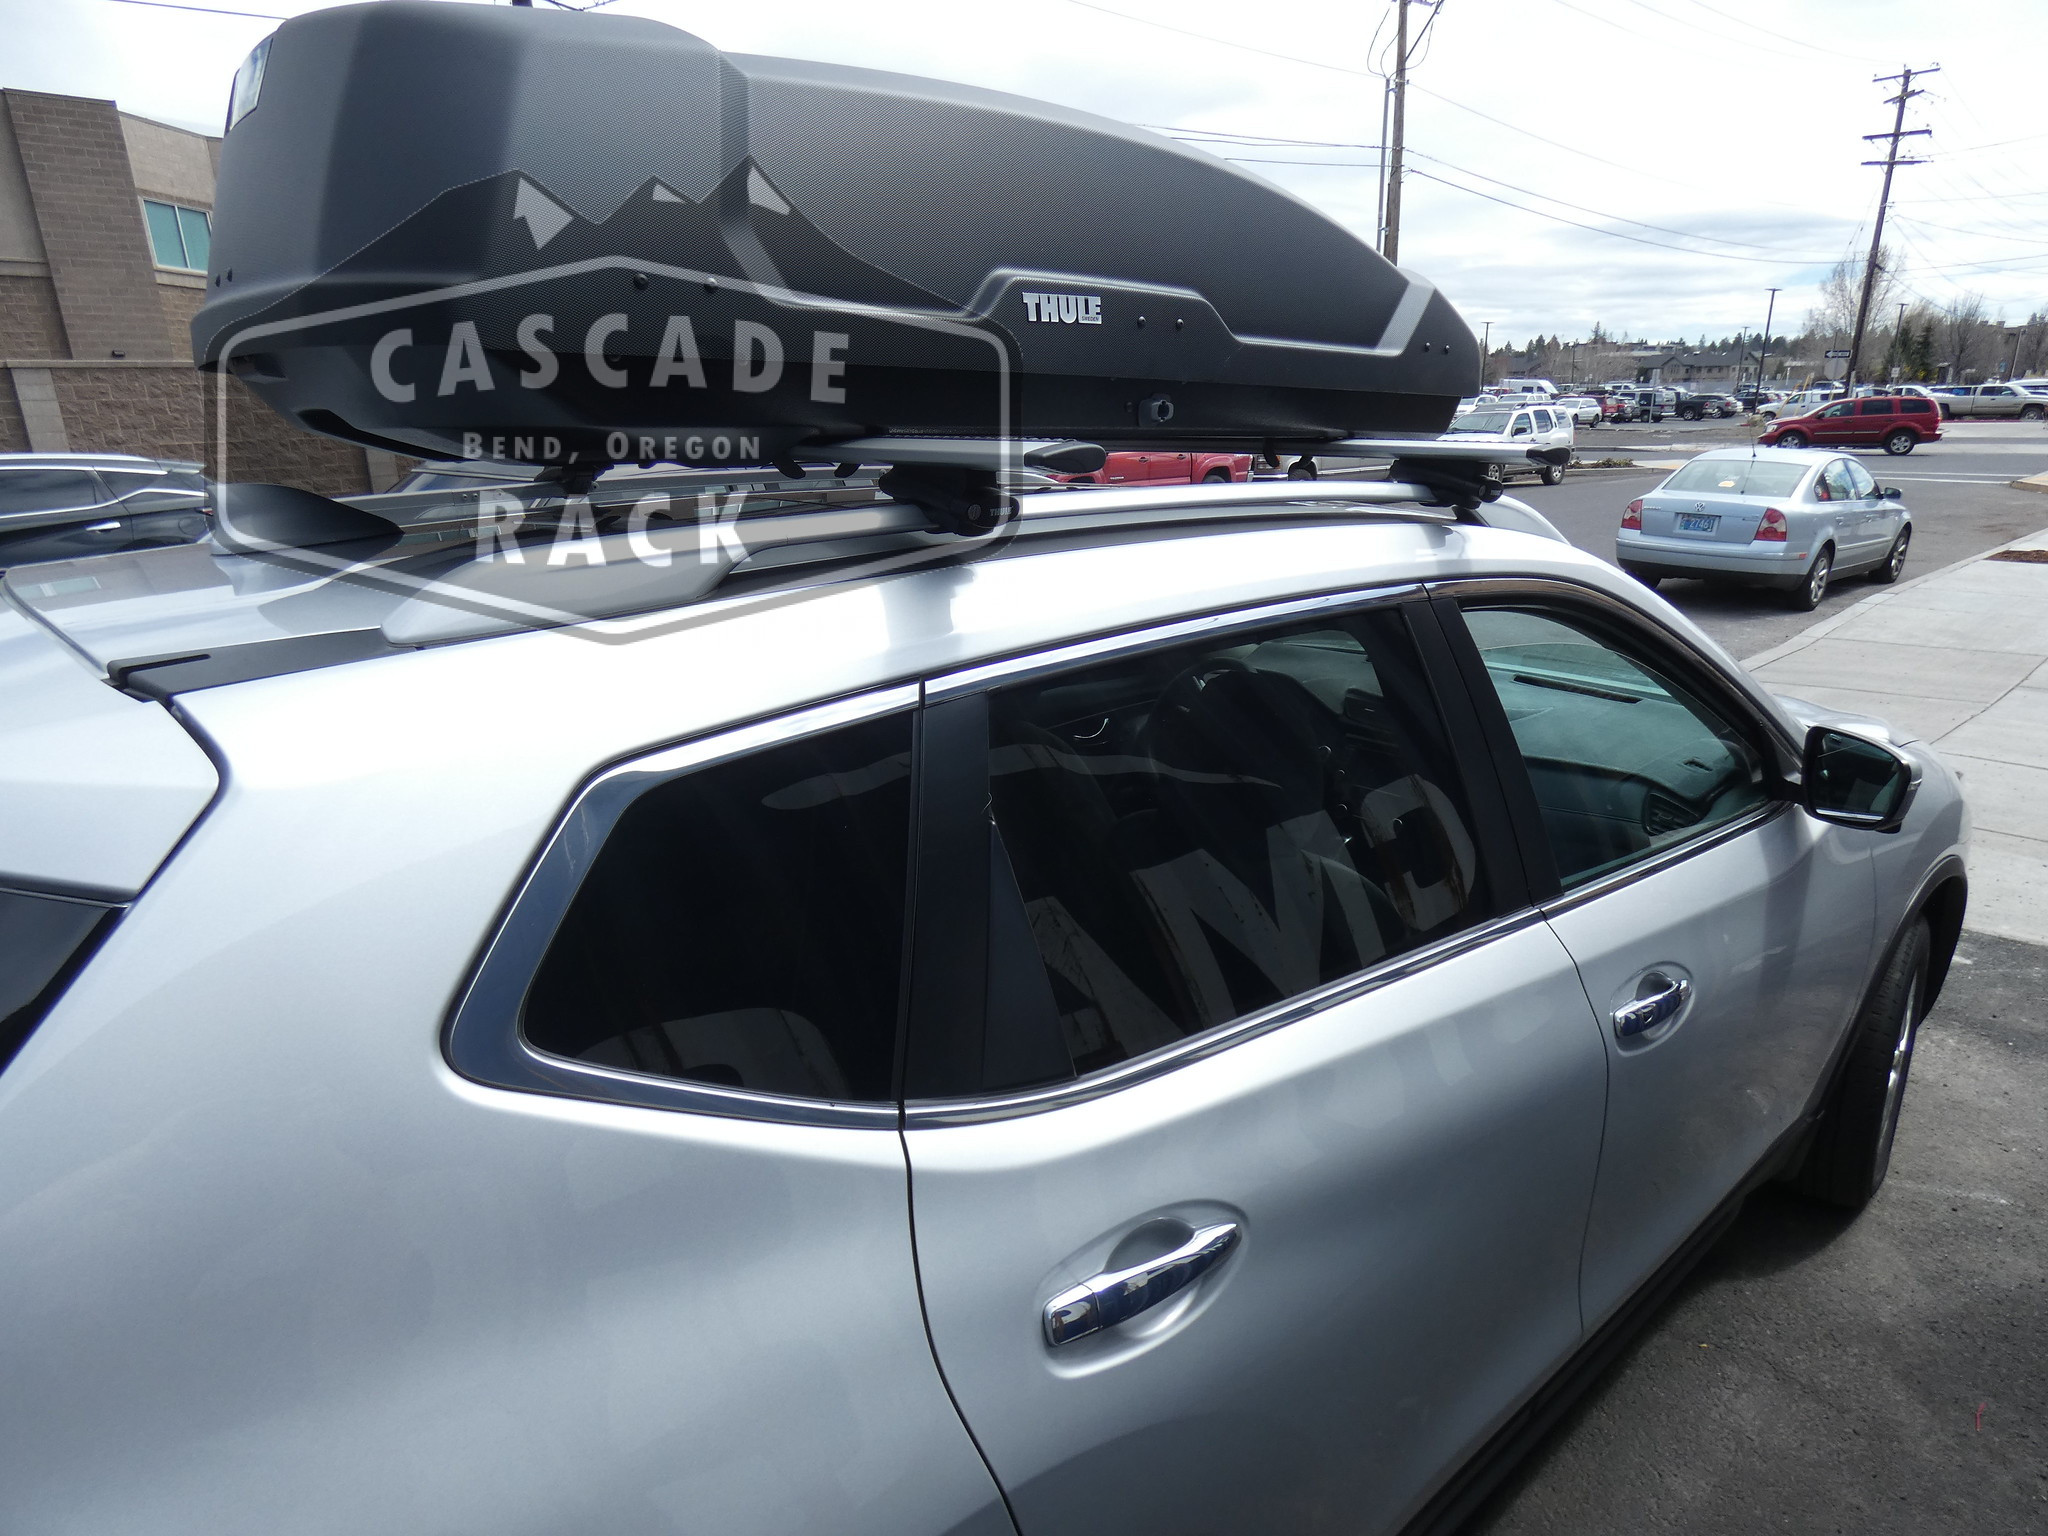 2017 Nissan Rogue – Base Rack and Roof Top Cargo Box – Thule